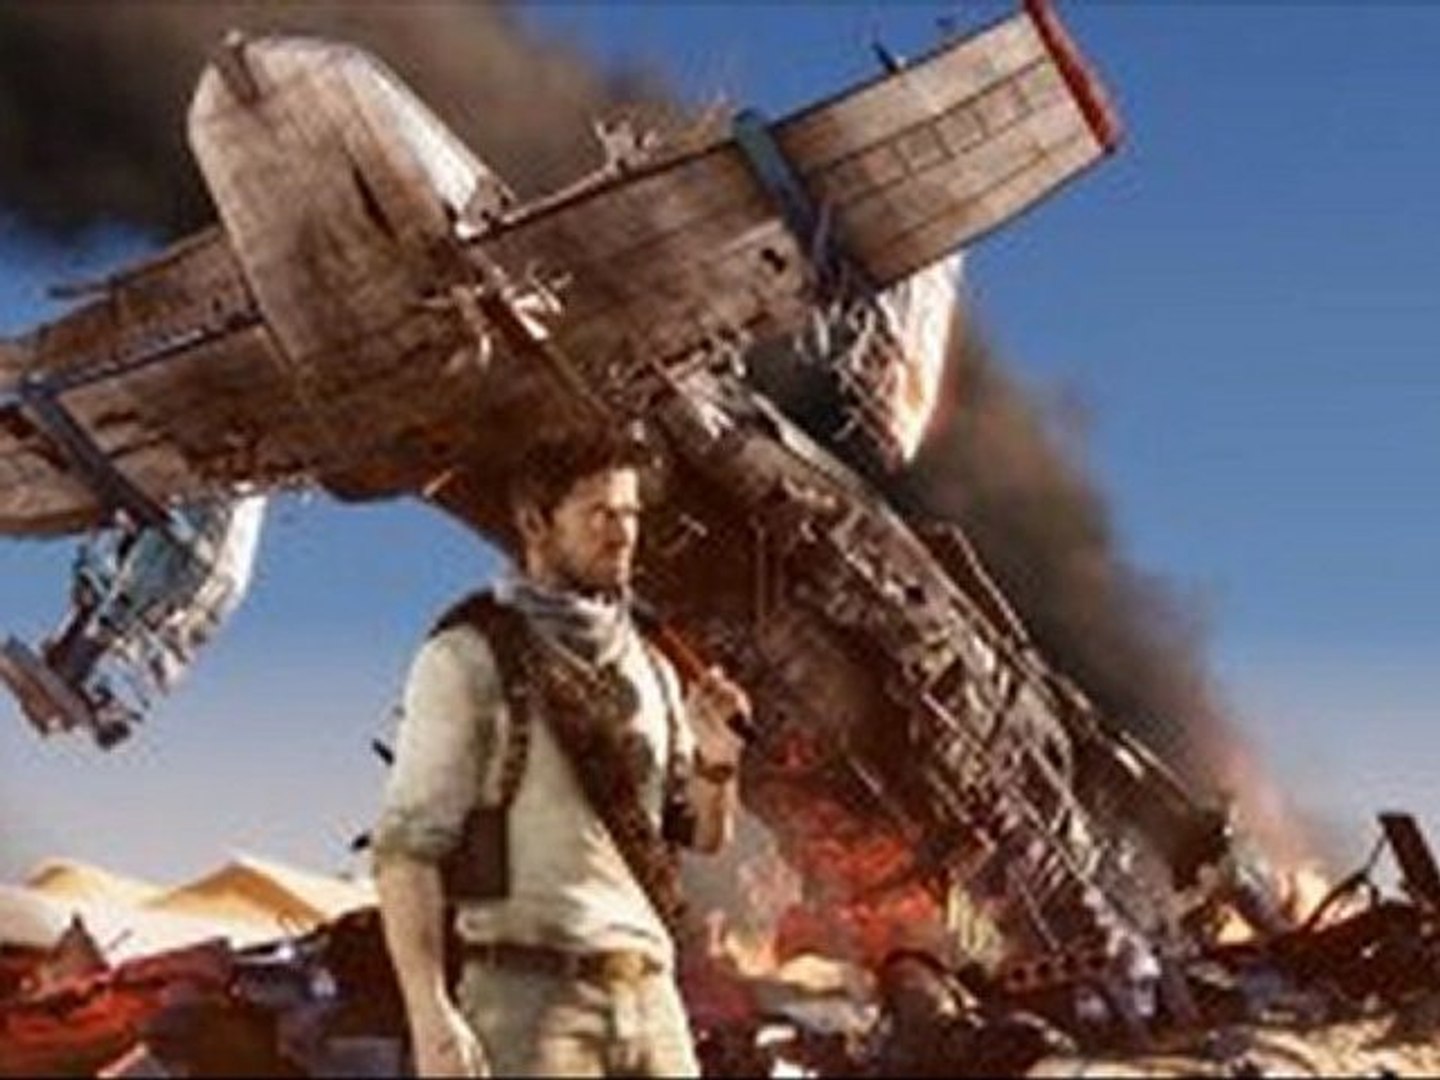 uncharted 2 pc download torrent tpb pirate